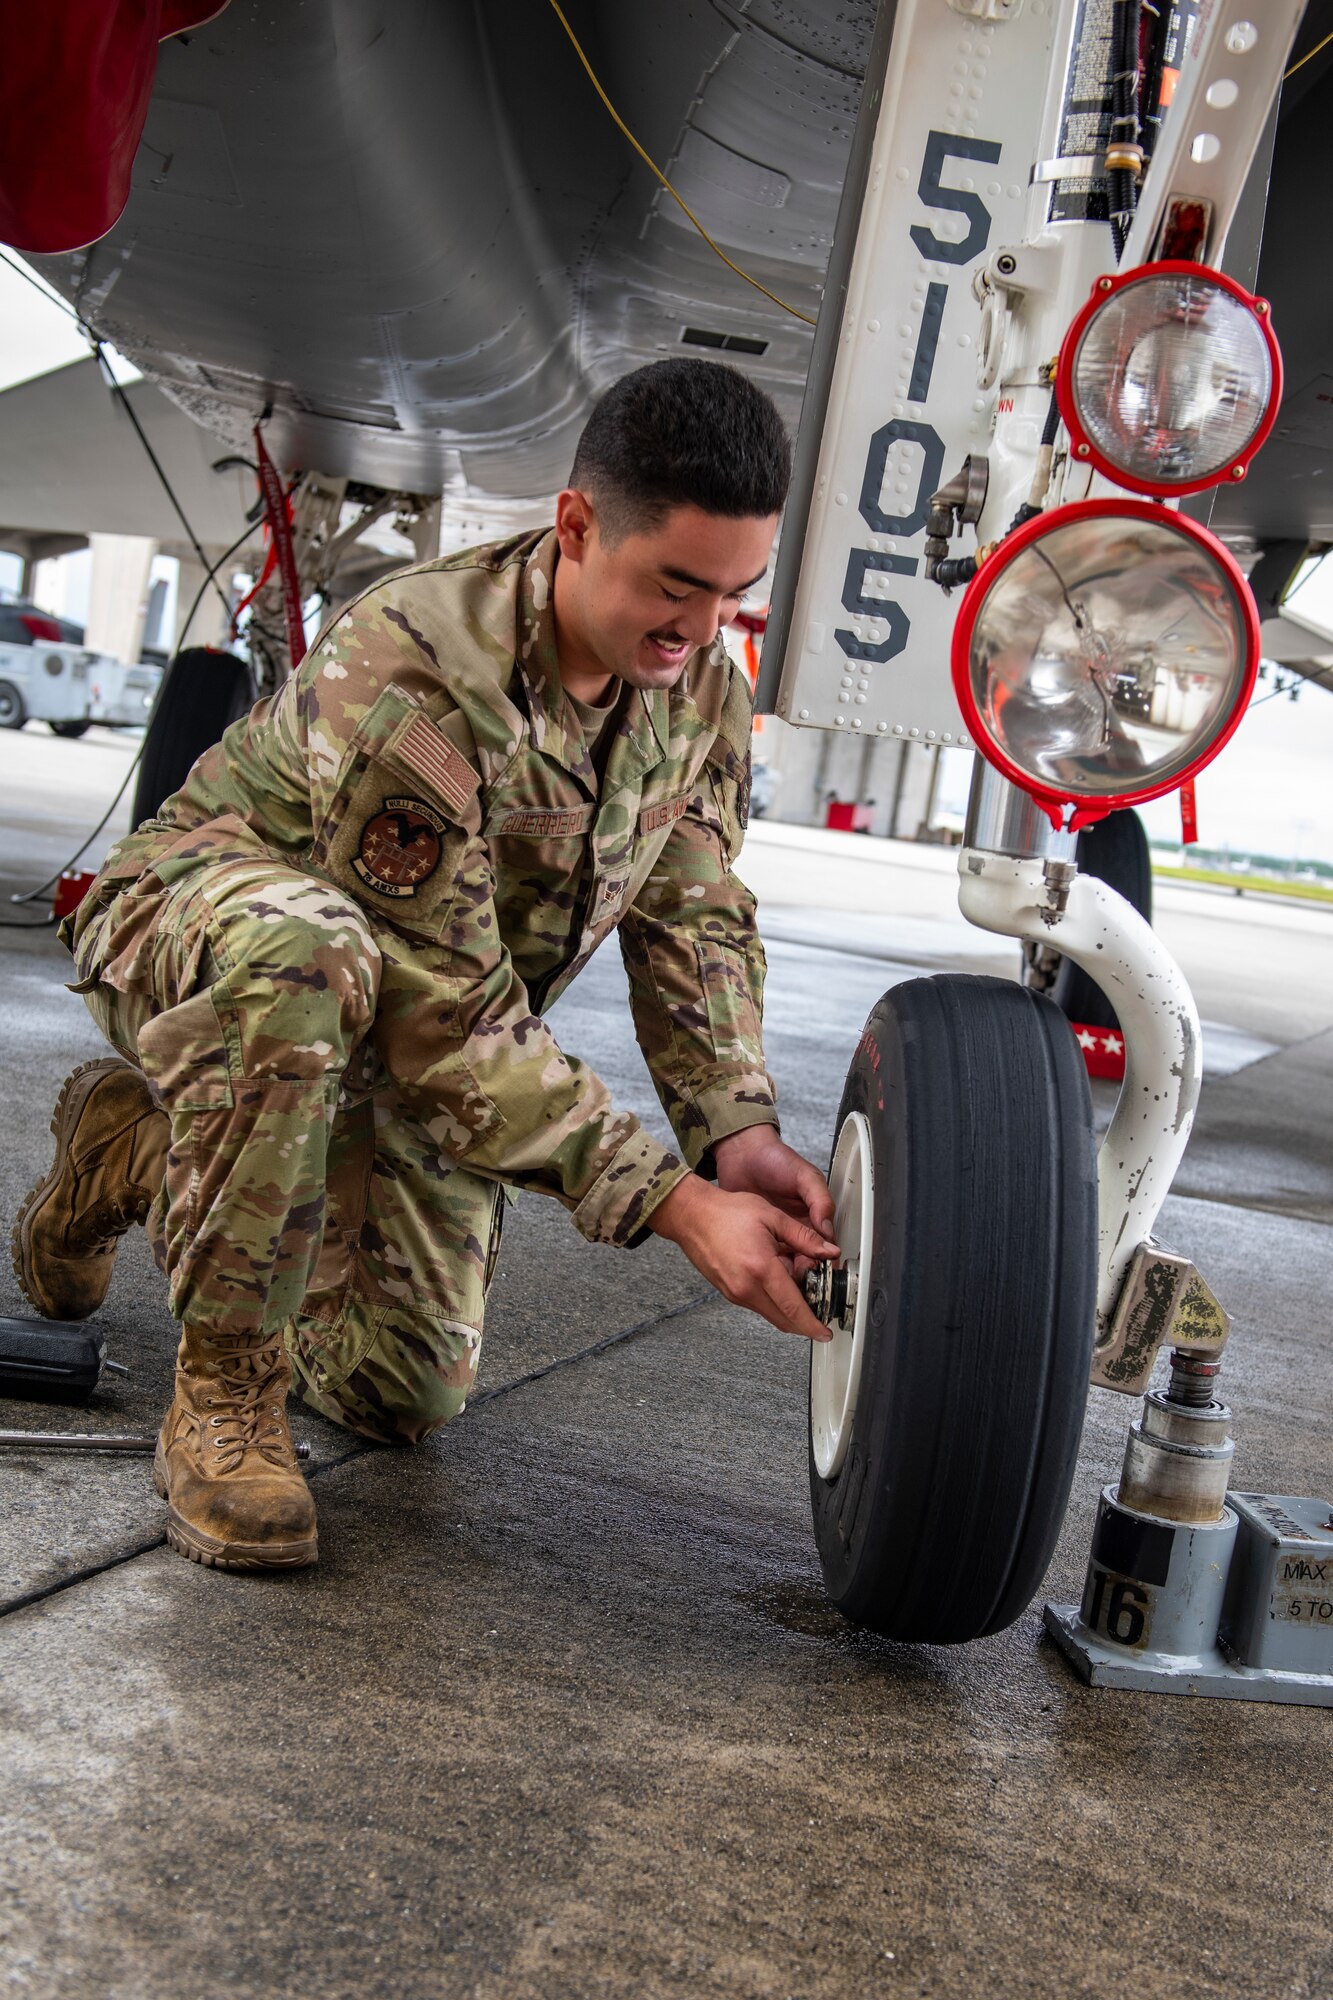 A maintainer changes a tire on an aircraft